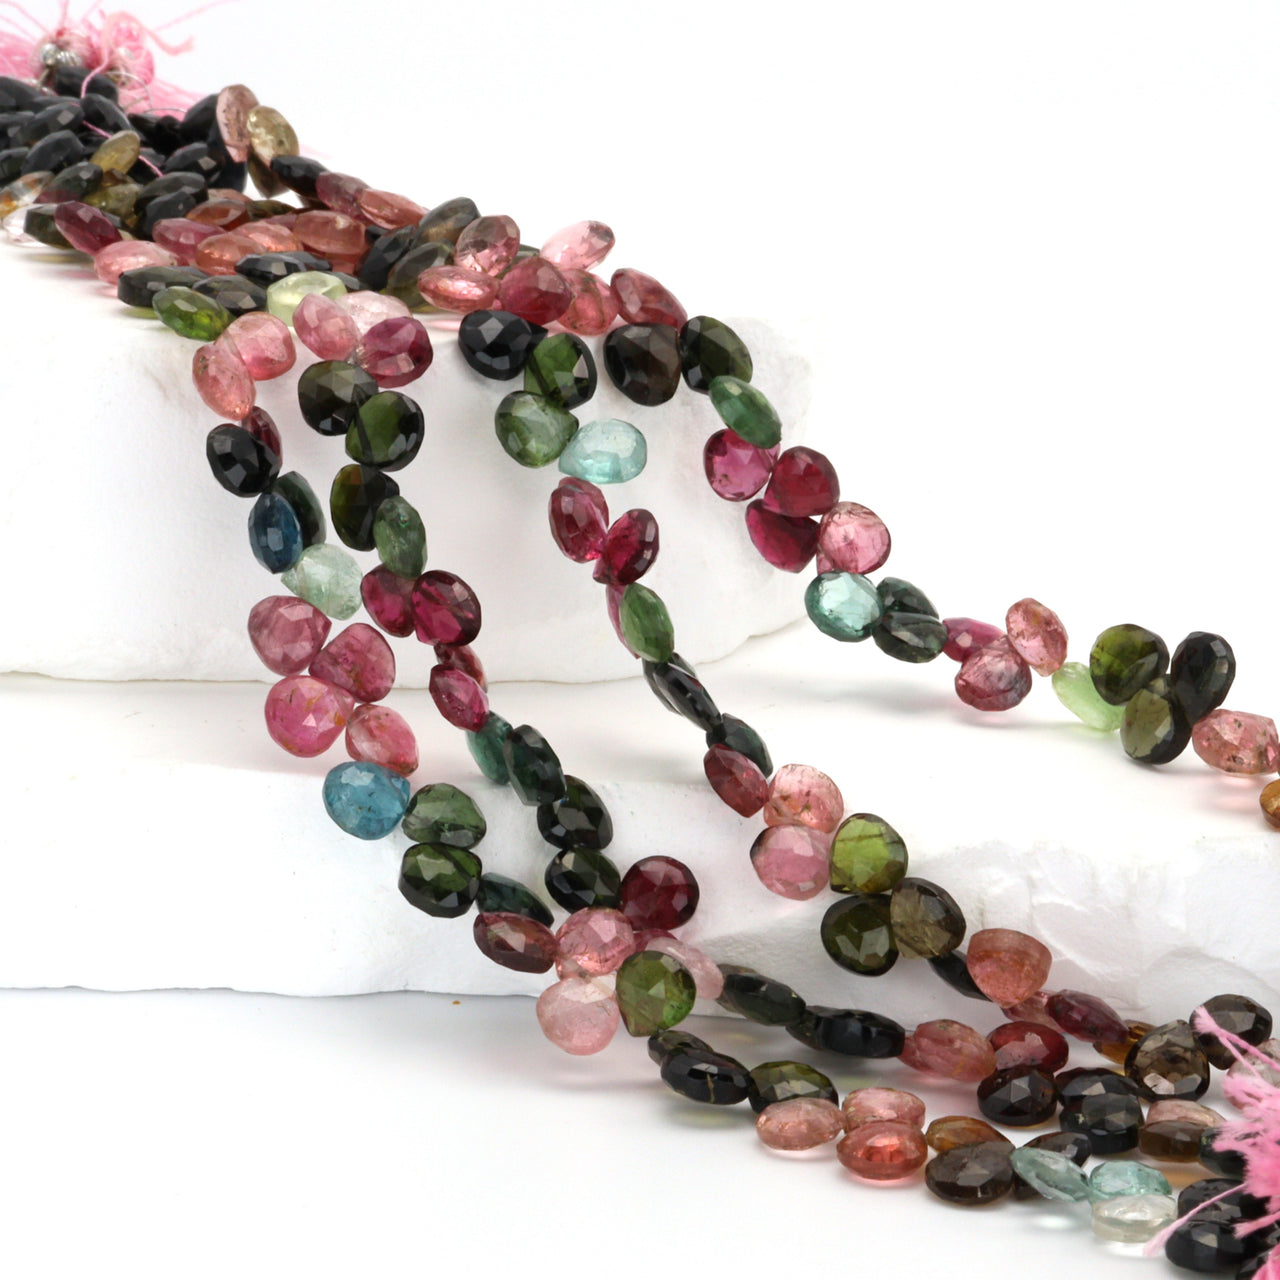 Watermelon Tourmaline 6mm Faceted Heart Shaped Briolettes